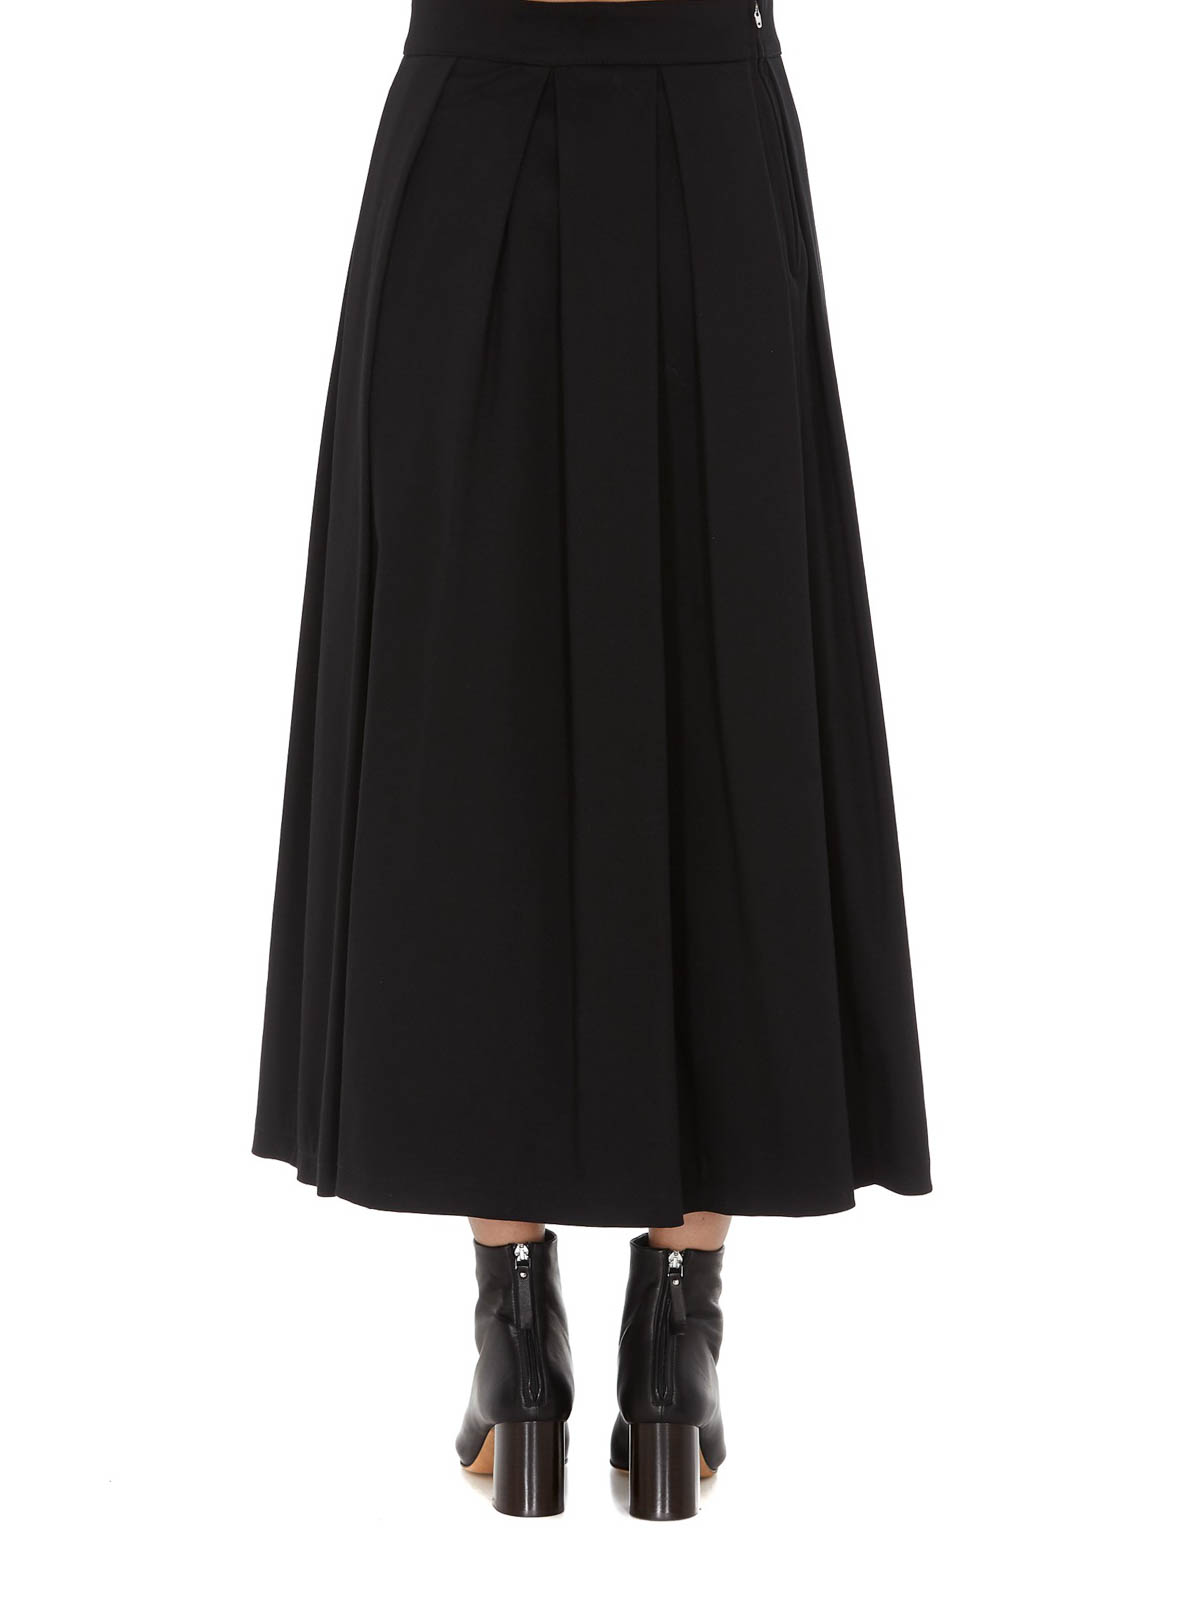 Discover more than 186 buy long skirts online